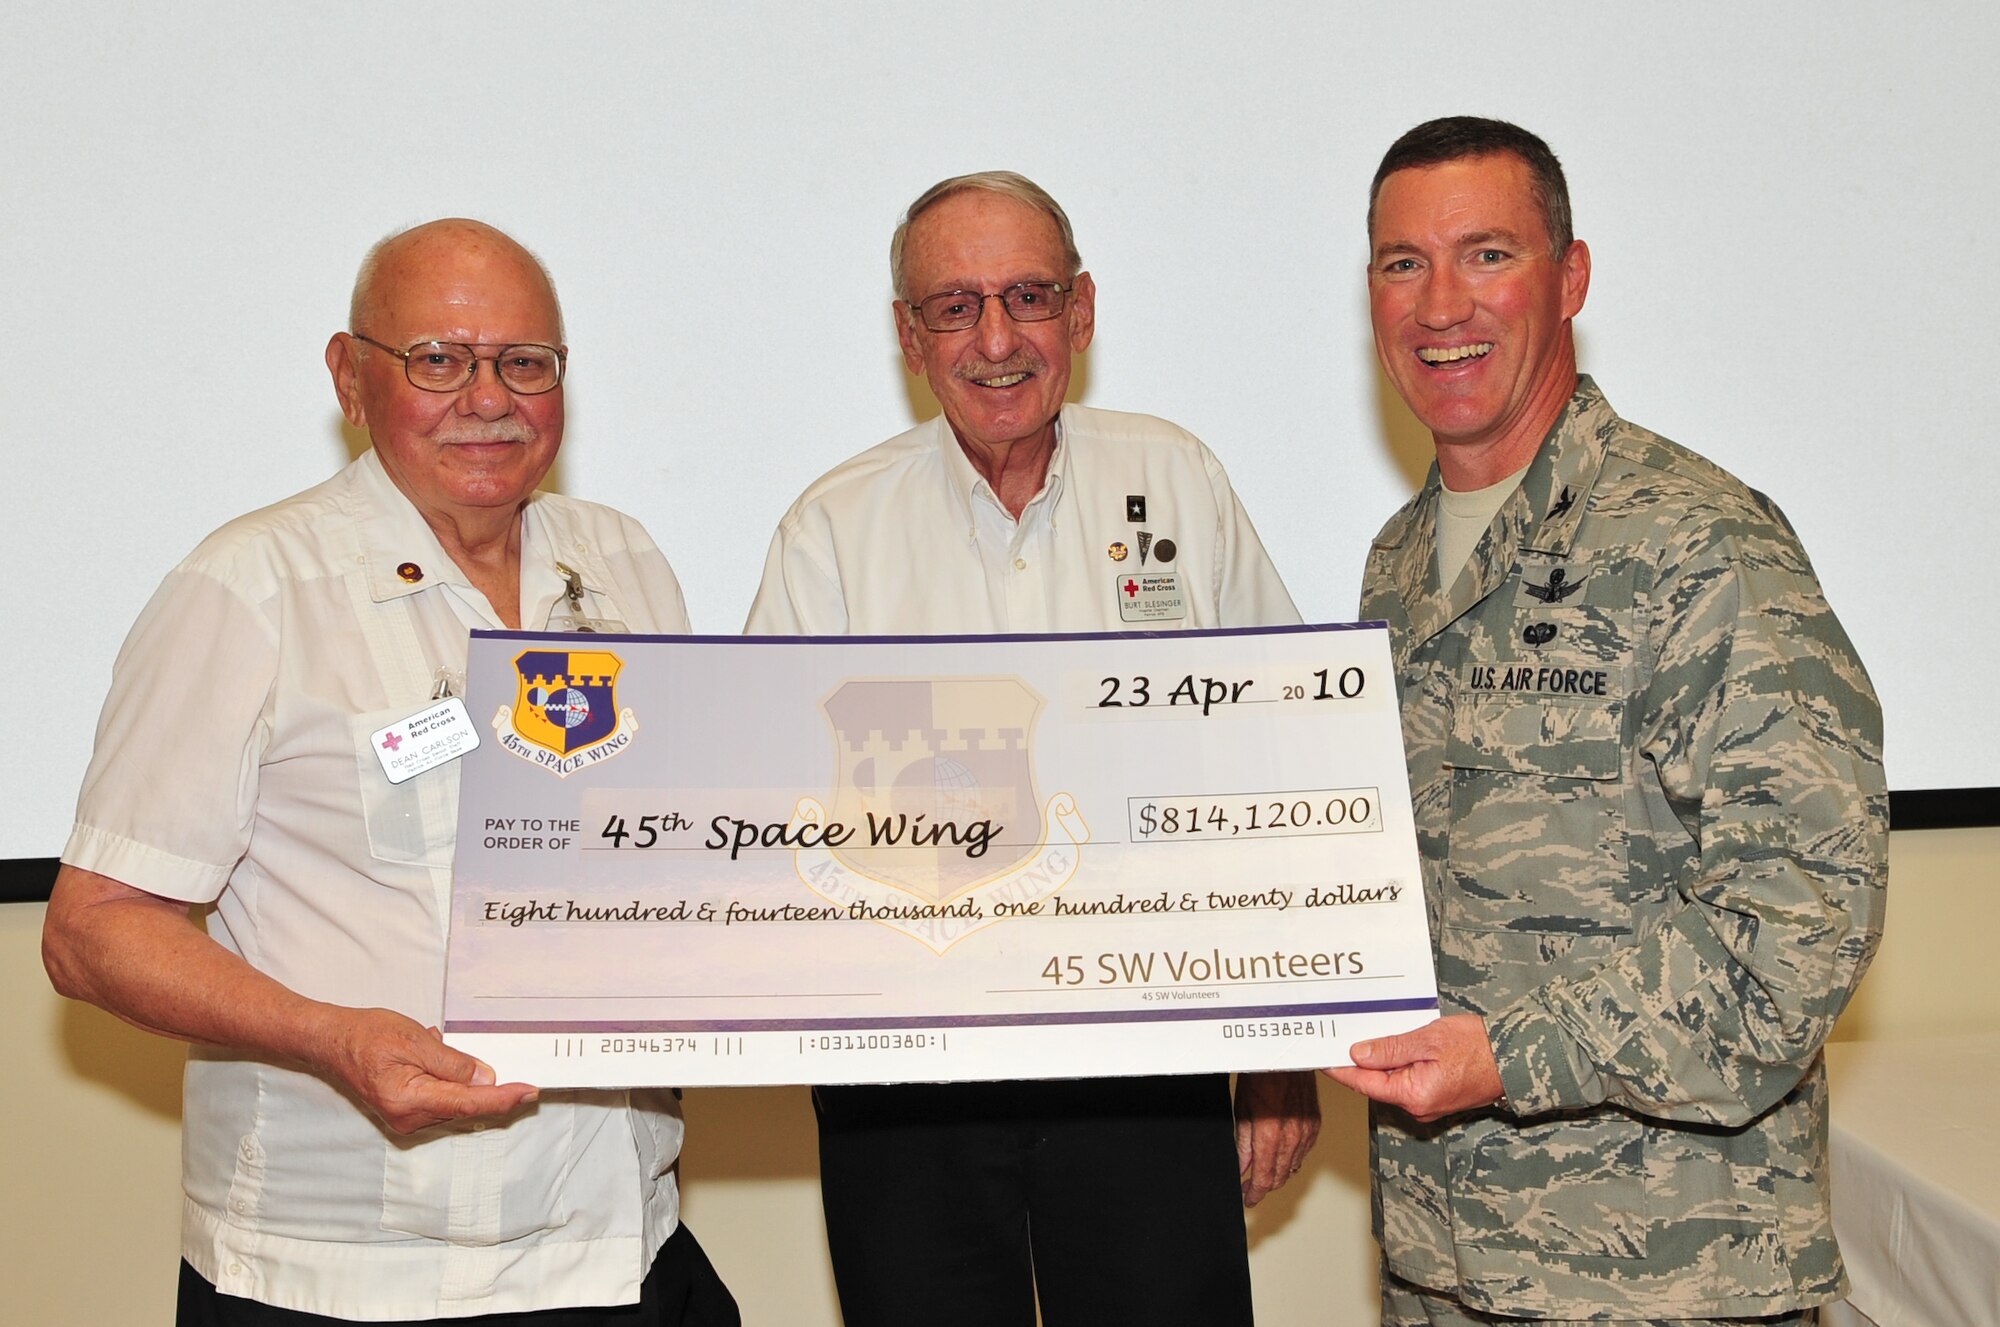 Red Cross Volunteers Dean Carlson (left) and Burt Slesinger present 45th Space Wing
Commander Col. Ed Wilson with a check for the $814,120 volunteers saved the Wing in 2009 at the annual Volunteer Appreciation Week Ice Cream Social at the Airman
& Family Readiness Center April 23. After accepting the check, Colonel Wilson presented Volunteer Excellence Awards to Candice Graves, Trudy Hughes and Michael McAleenan for their work with various Wing and community activities. (U.S. Air Force photo/Jennifer Macklin)